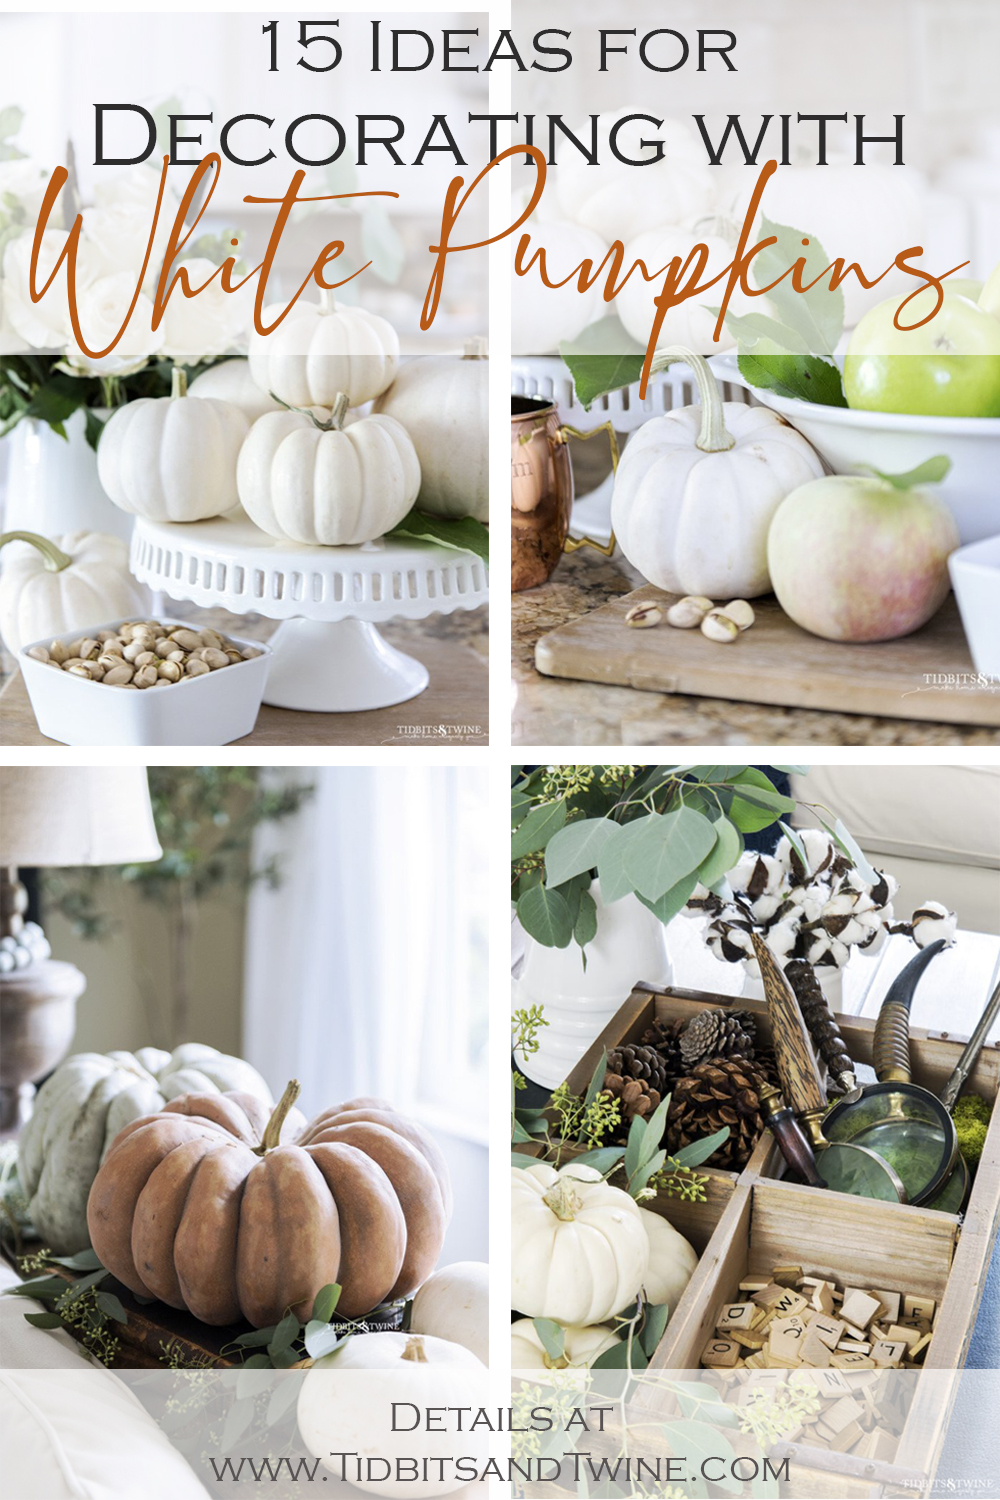 Decorating with White Pumpkins: 15 Gorgeous and Easy Ideas - Tidbits&Twine